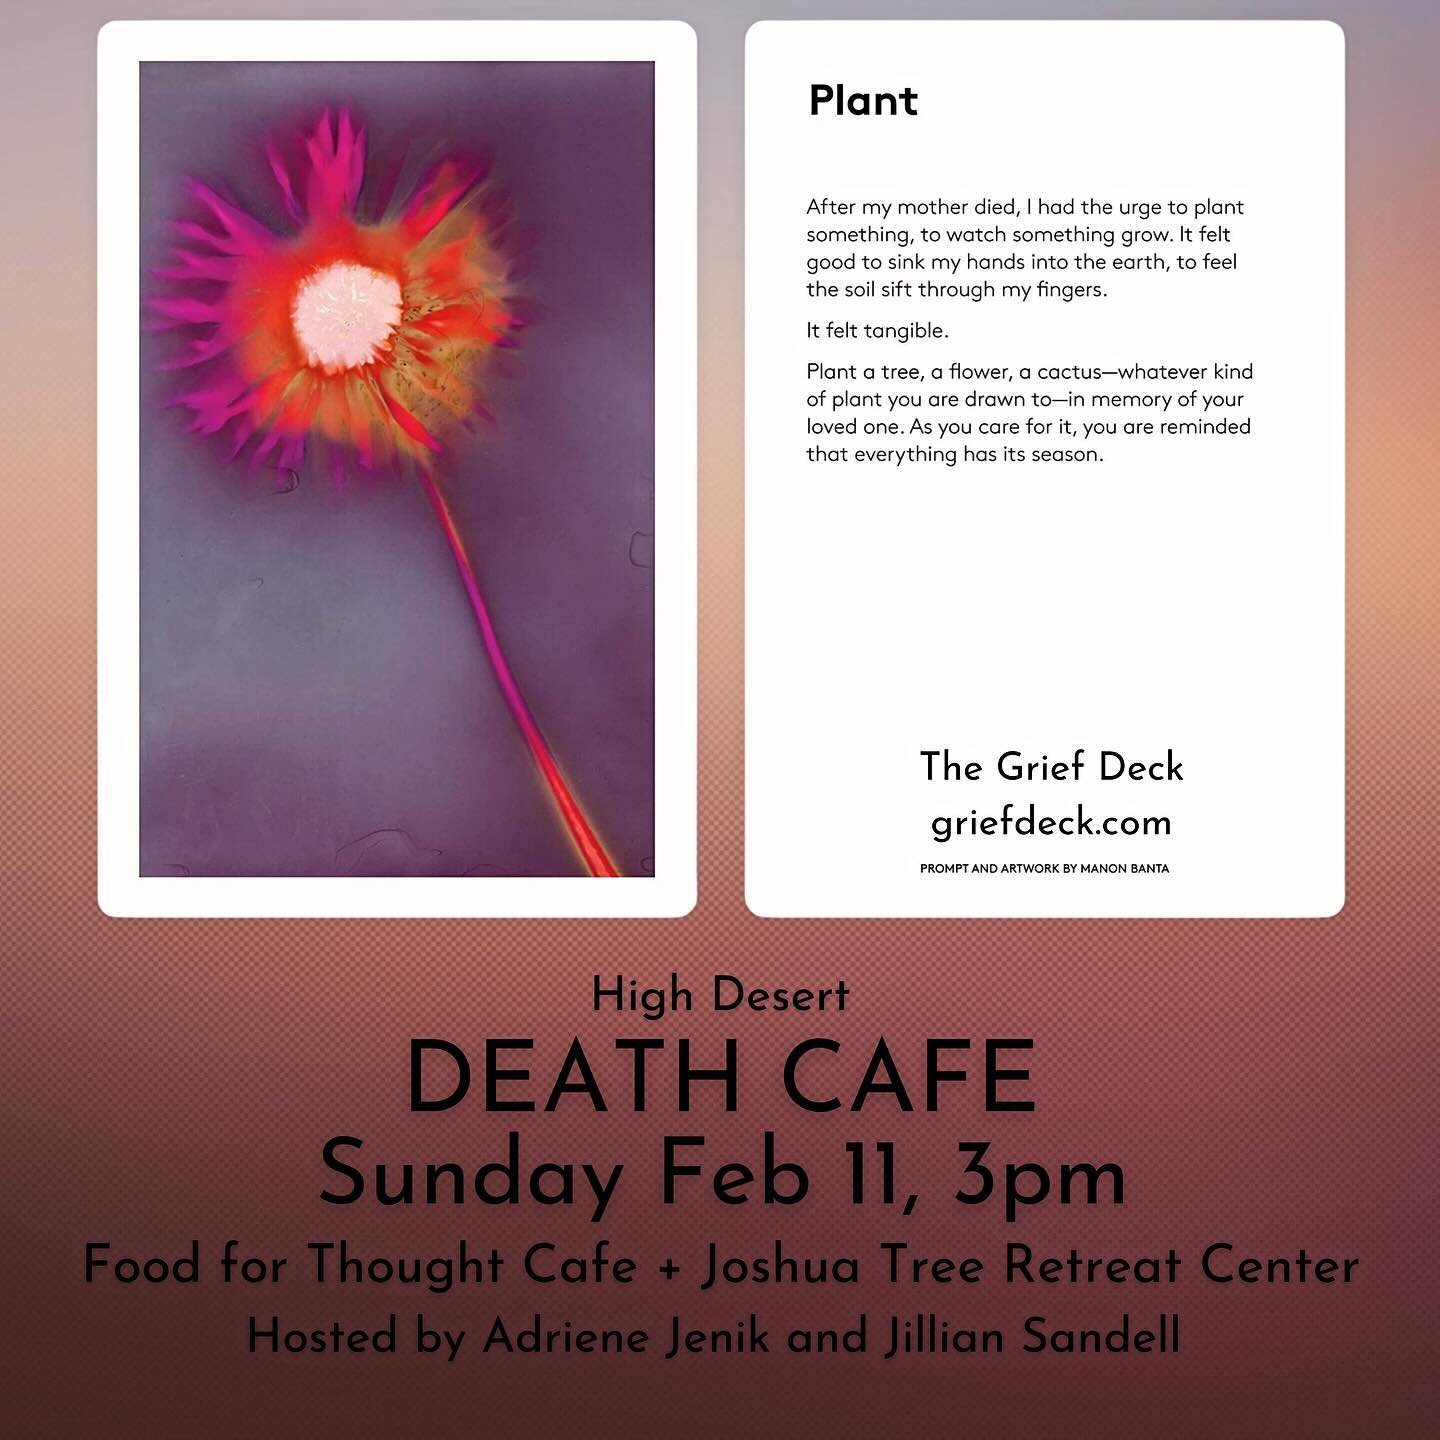 Join the High Desert community for the 
Death Cafe Sunday Feb 11, 3pm at 
Food for Thought Cafe @foodforthoughtcafejt 
Joshua Tree Retreat Center @jtretreatcenter 

A Death Cafe is candid conversation about the various aspects of death and dying.  Th